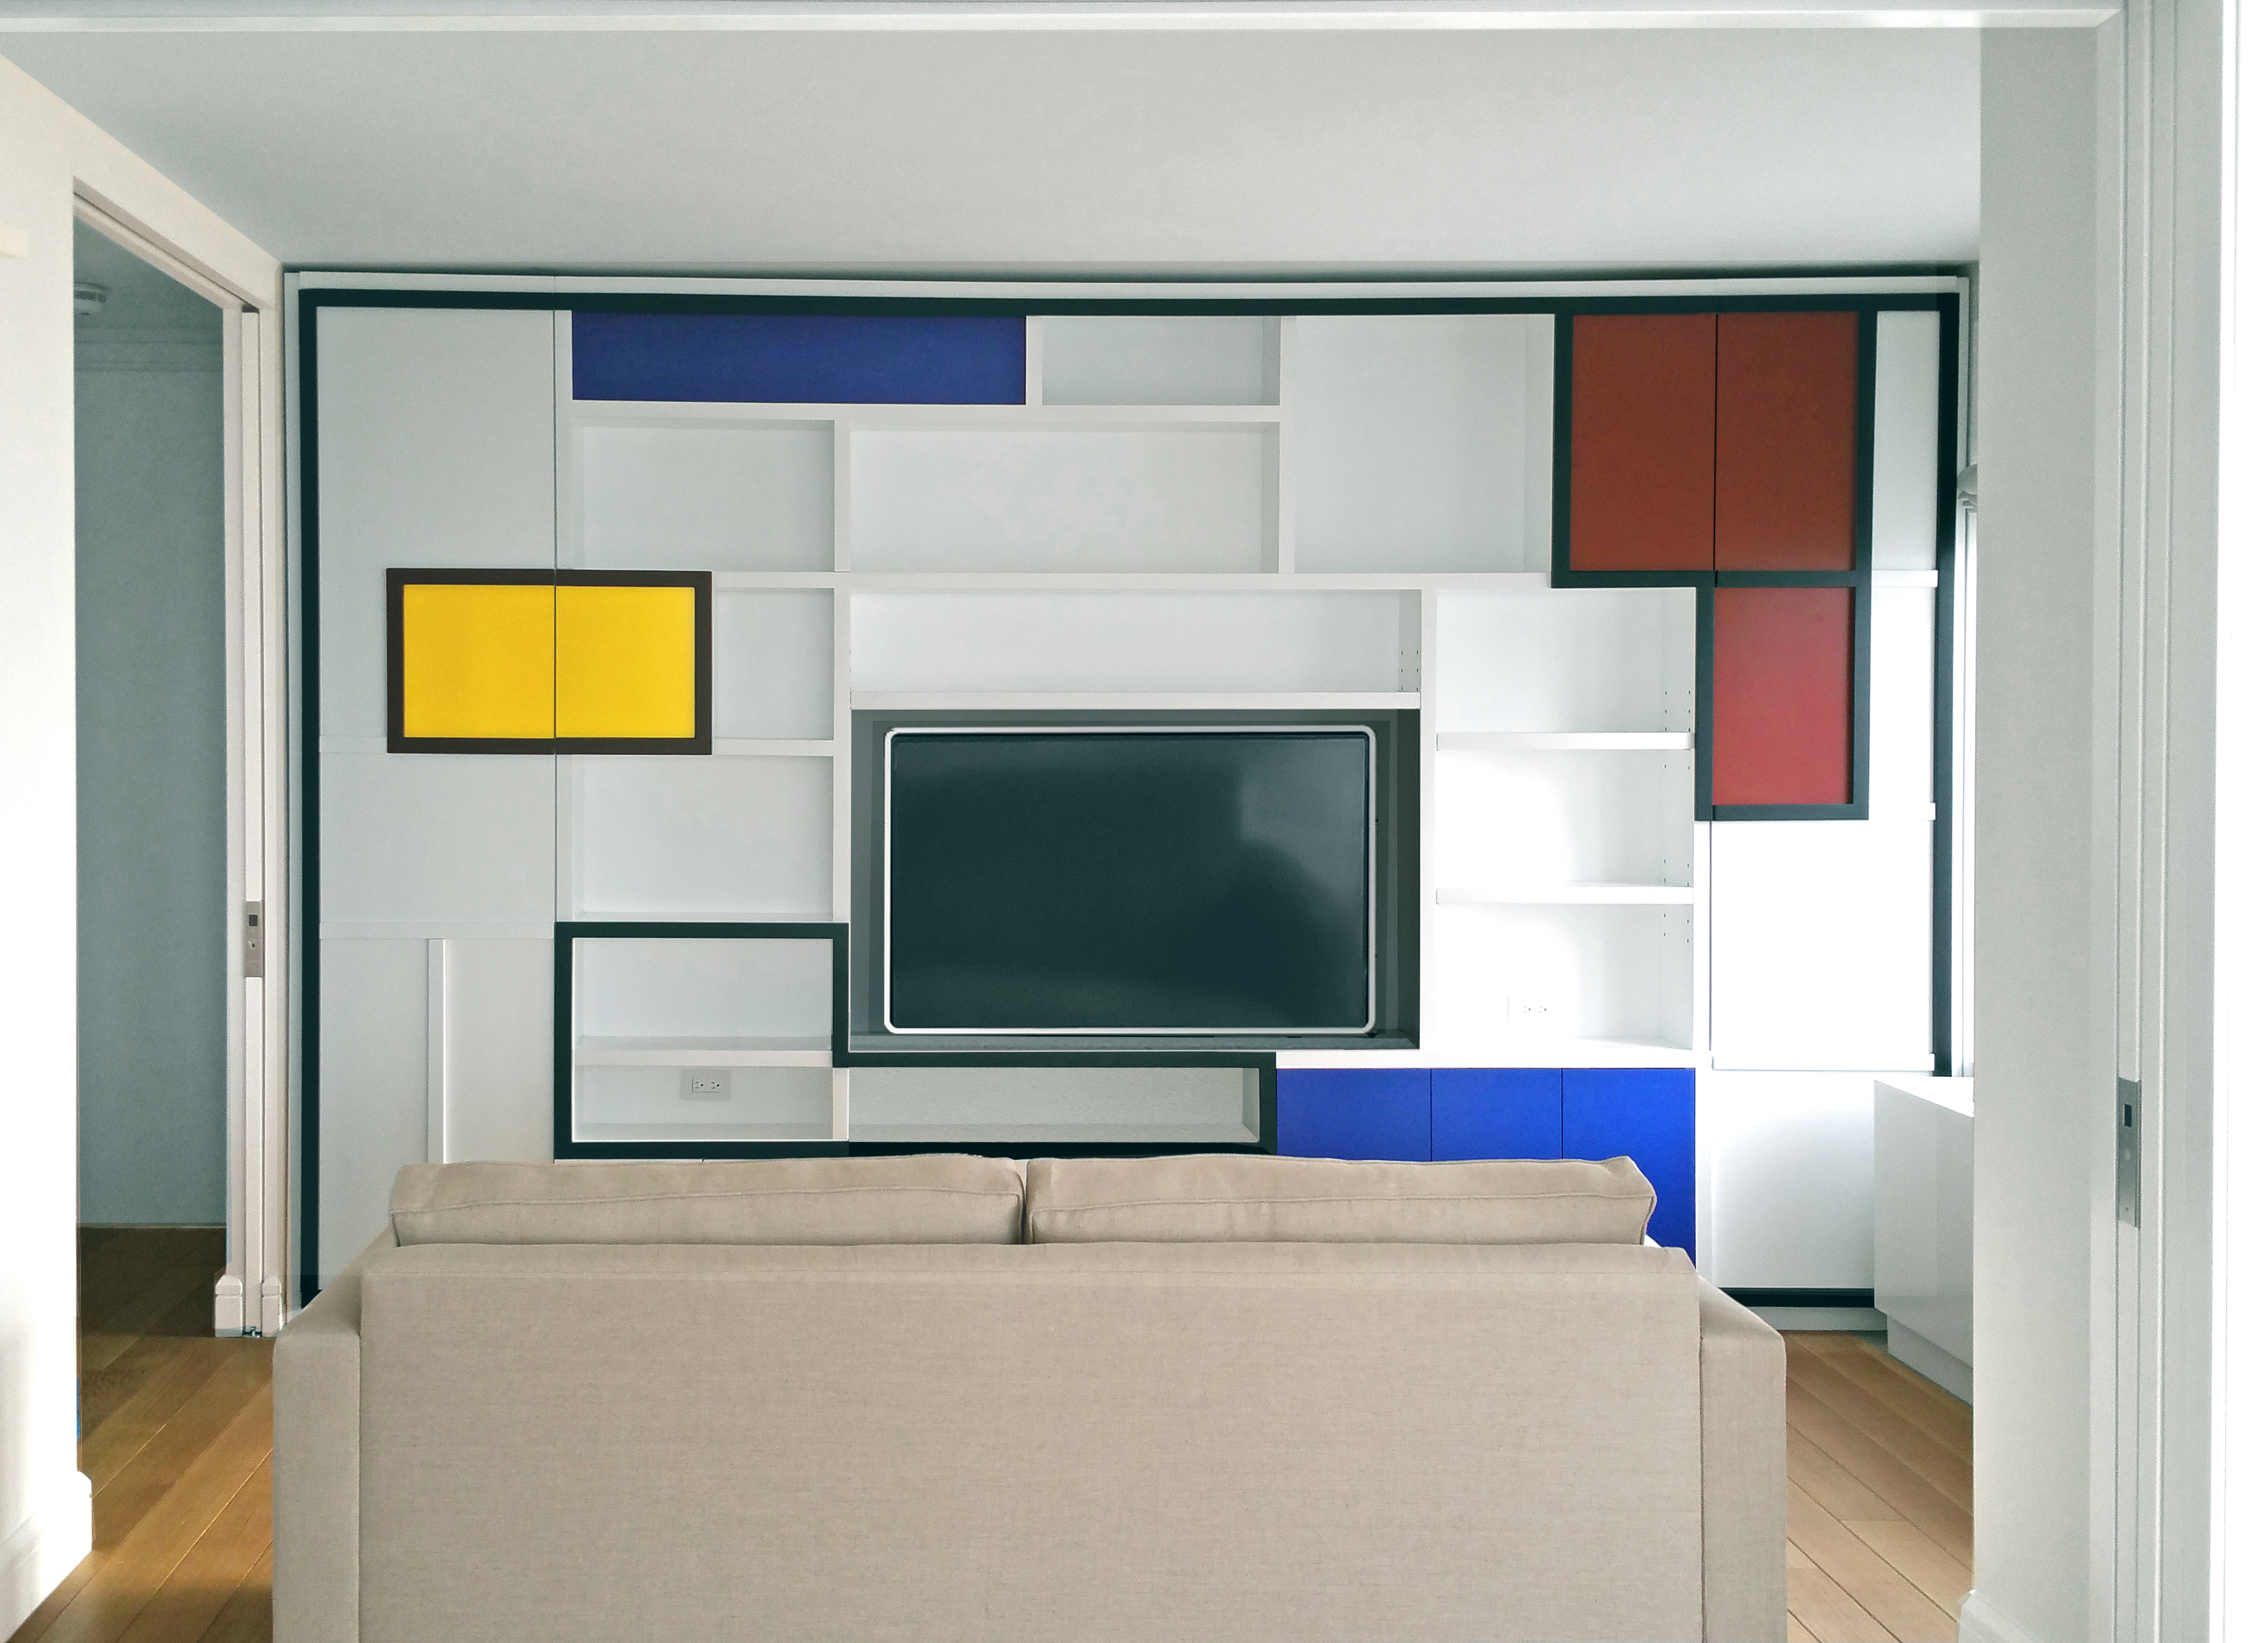 Custom sofa and entertainment system inspired by Piet Mondrian by Bespoke by Luigi Gentile